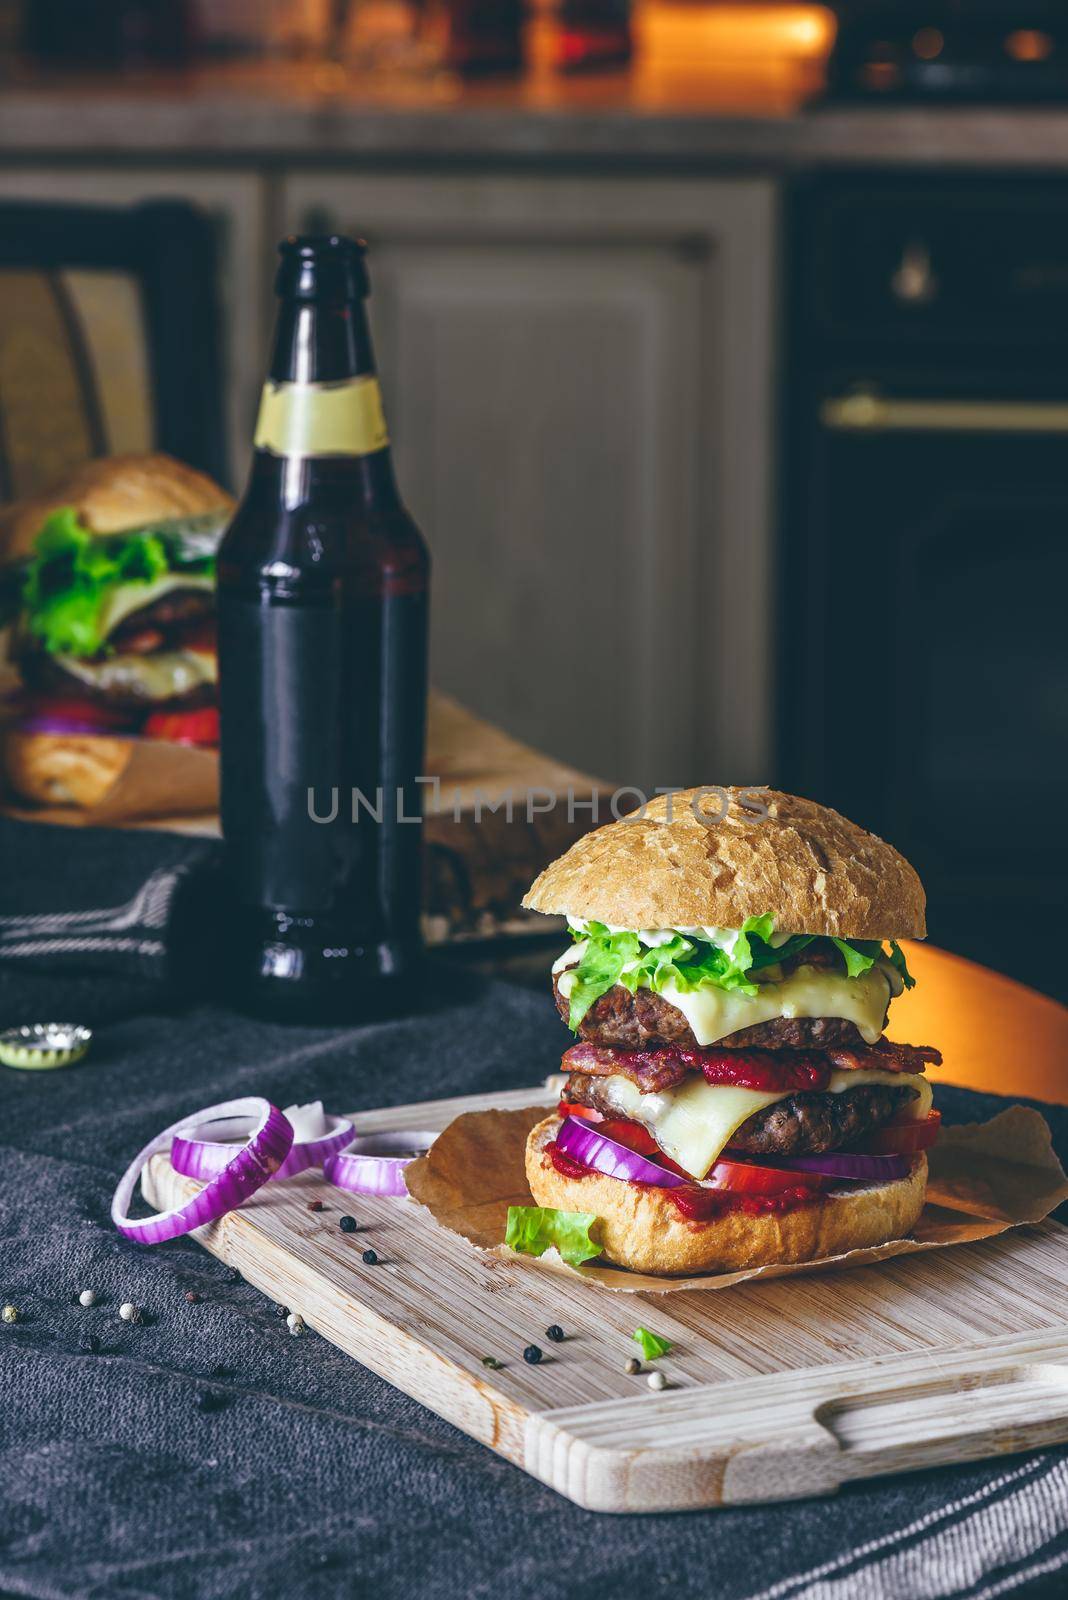 Prepared Cheeseburger on Cutting Board with Bottle of Beer on T by Seva_blsv